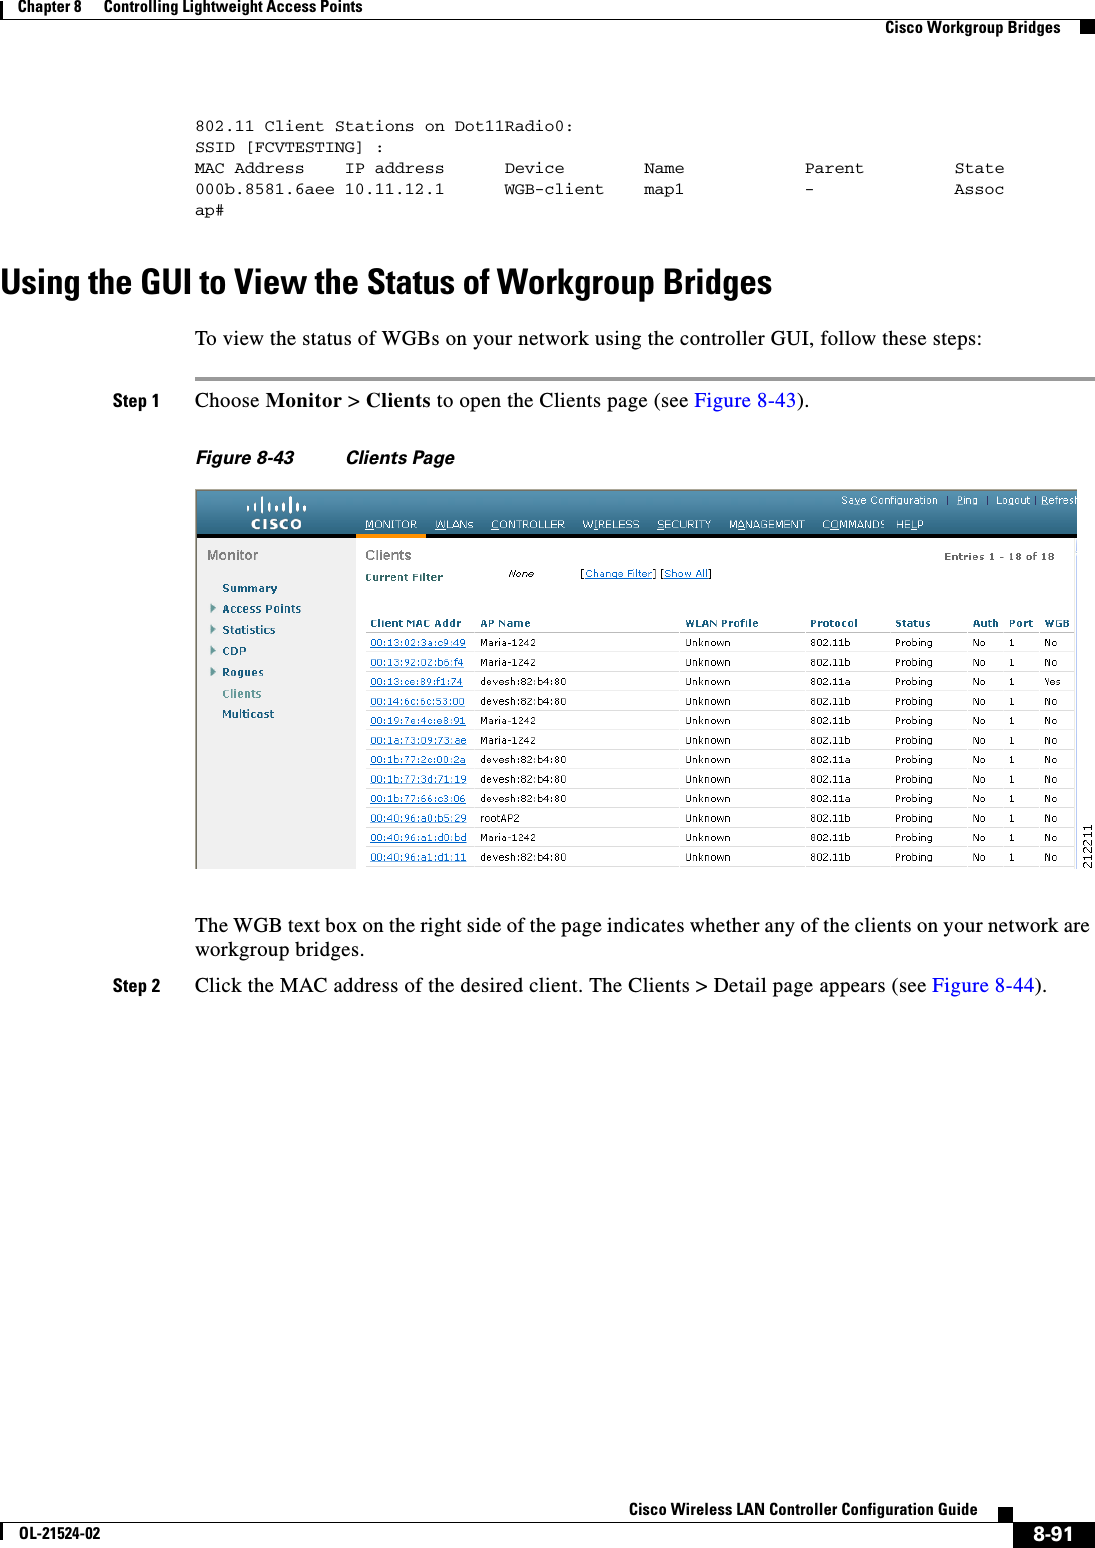  8-91Cisco Wireless LAN Controller Configuration GuideOL-21524-02Chapter 8      Controlling Lightweight Access Points  Cisco Workgroup Bridges802.11 Client Stations on Dot11Radio0:SSID [FCVTESTING] :MAC Address    IP address      Device        Name            Parent         State000b.8581.6aee 10.11.12.1      WGB-client    map1            -              Assocap#Using the GUI to View the Status of Workgroup BridgesTo view the status of WGBs on your network using the controller GUI, follow these steps:Step 1 Choose Monitor &gt; Clients to open the Clients page (see Figure 8-43).Figure 8-43 Clients PageThe WGB text box on the right side of the page indicates whether any of the clients on your network are workgroup bridges.Step 2 Click the MAC address of the desired client. The Clients &gt; Detail page appears (see Figure 8-44).